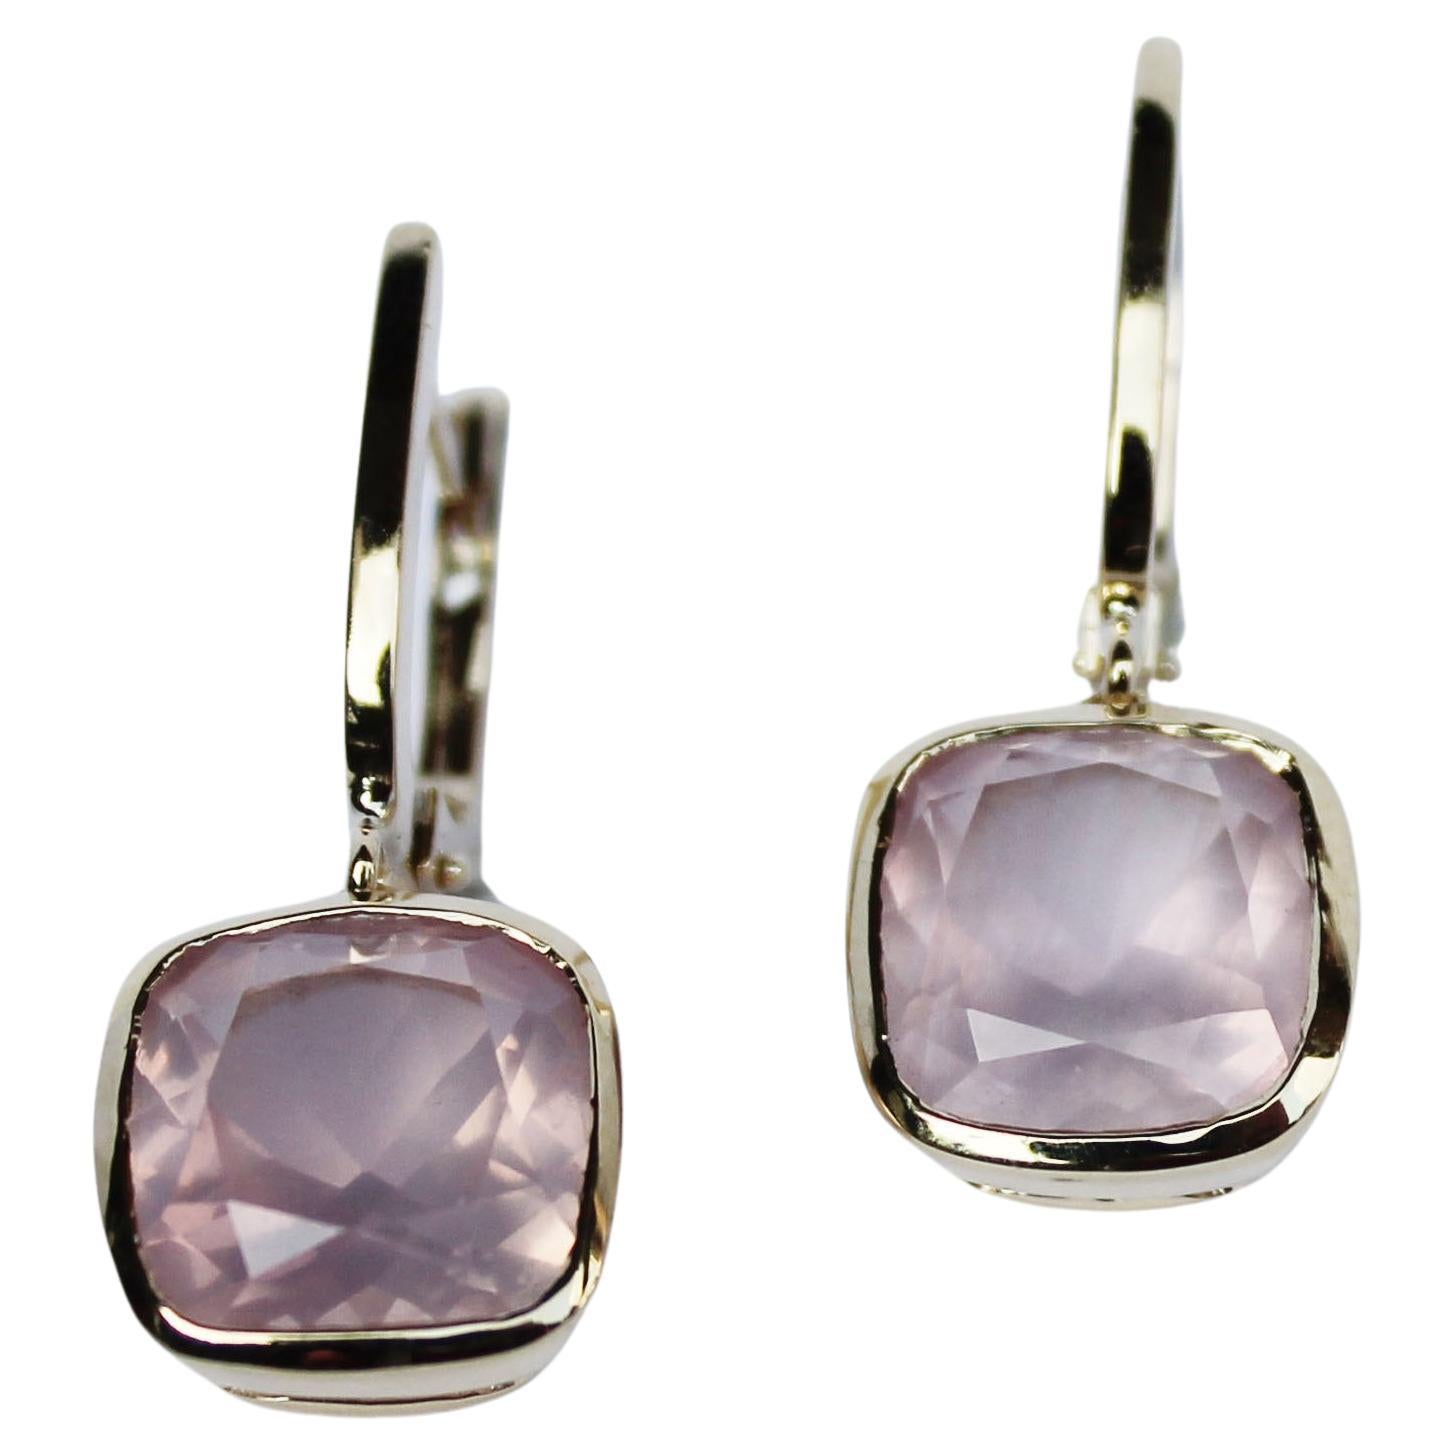 Earrings in yellow gold 18 Karat with pink Quartz (square cut, size: mm)

All Stanoppi Jewelry is new and has never been previously owned or worn. Each item will arrive at your door beautifully gift wrapped in Stanoppi boxes, put inside an elegant